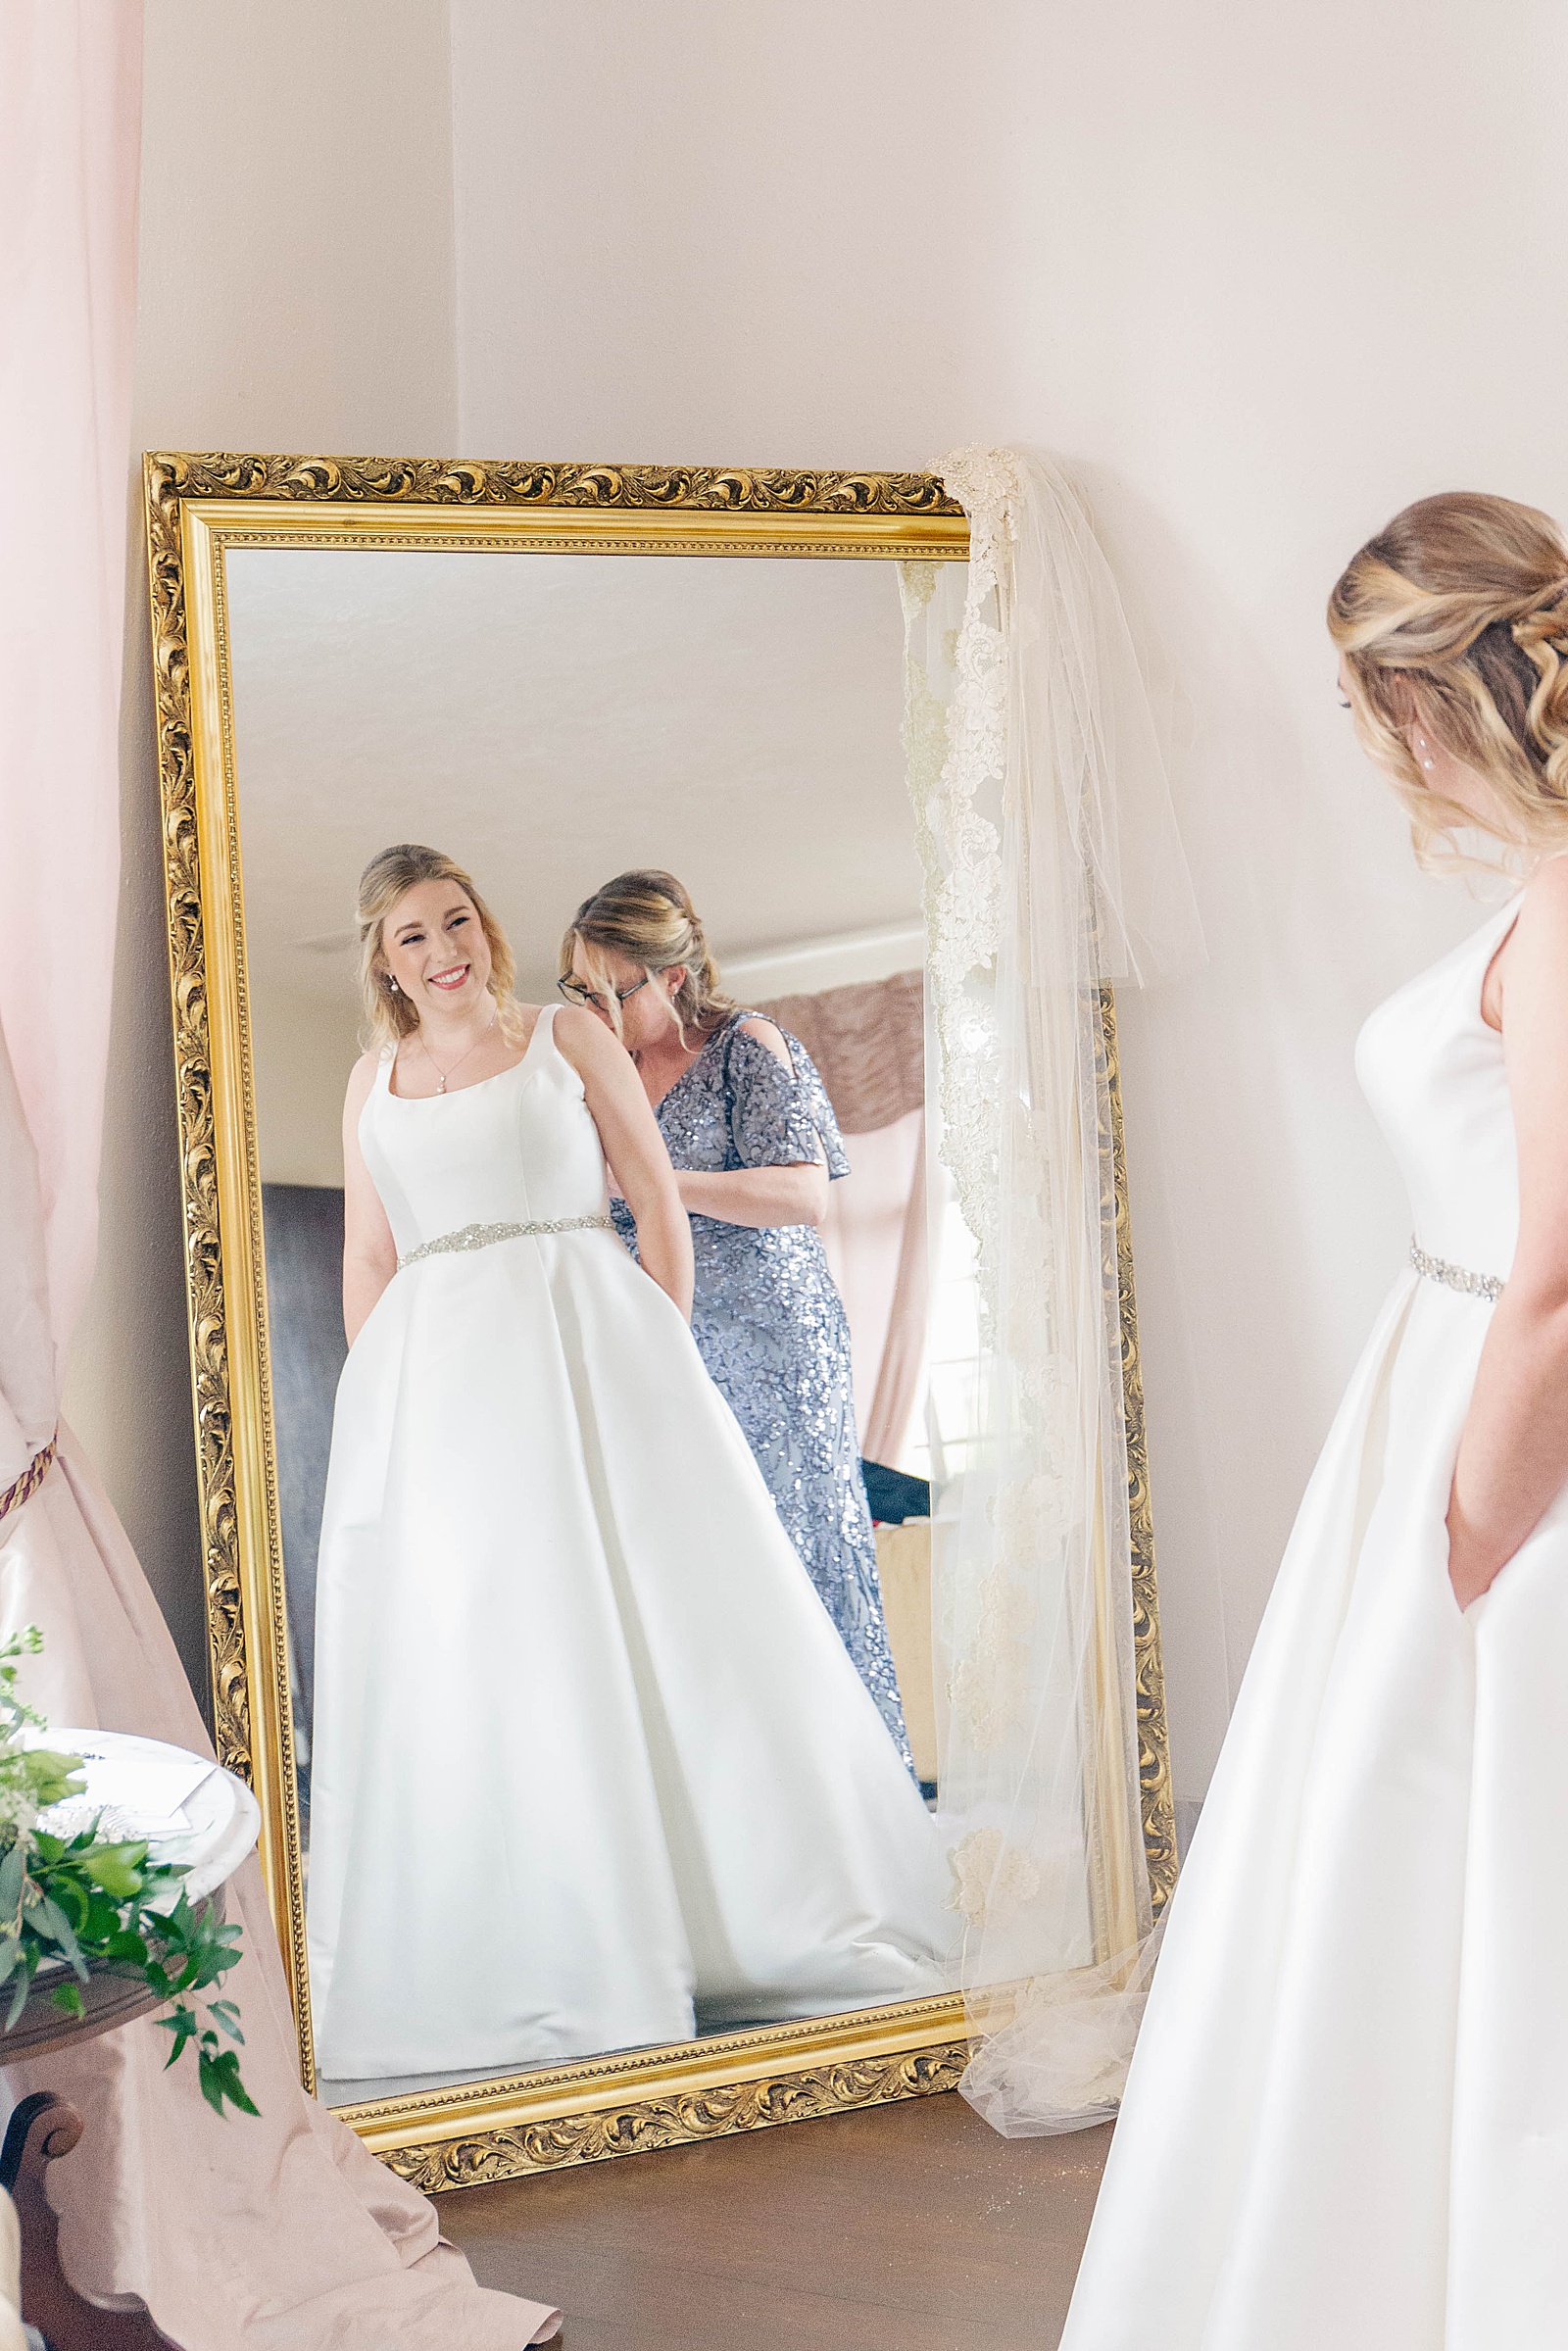 bride in wedding gown from Atlanta GA wedding dress shop looking at herself in a gold mirror before wedding ceremony.